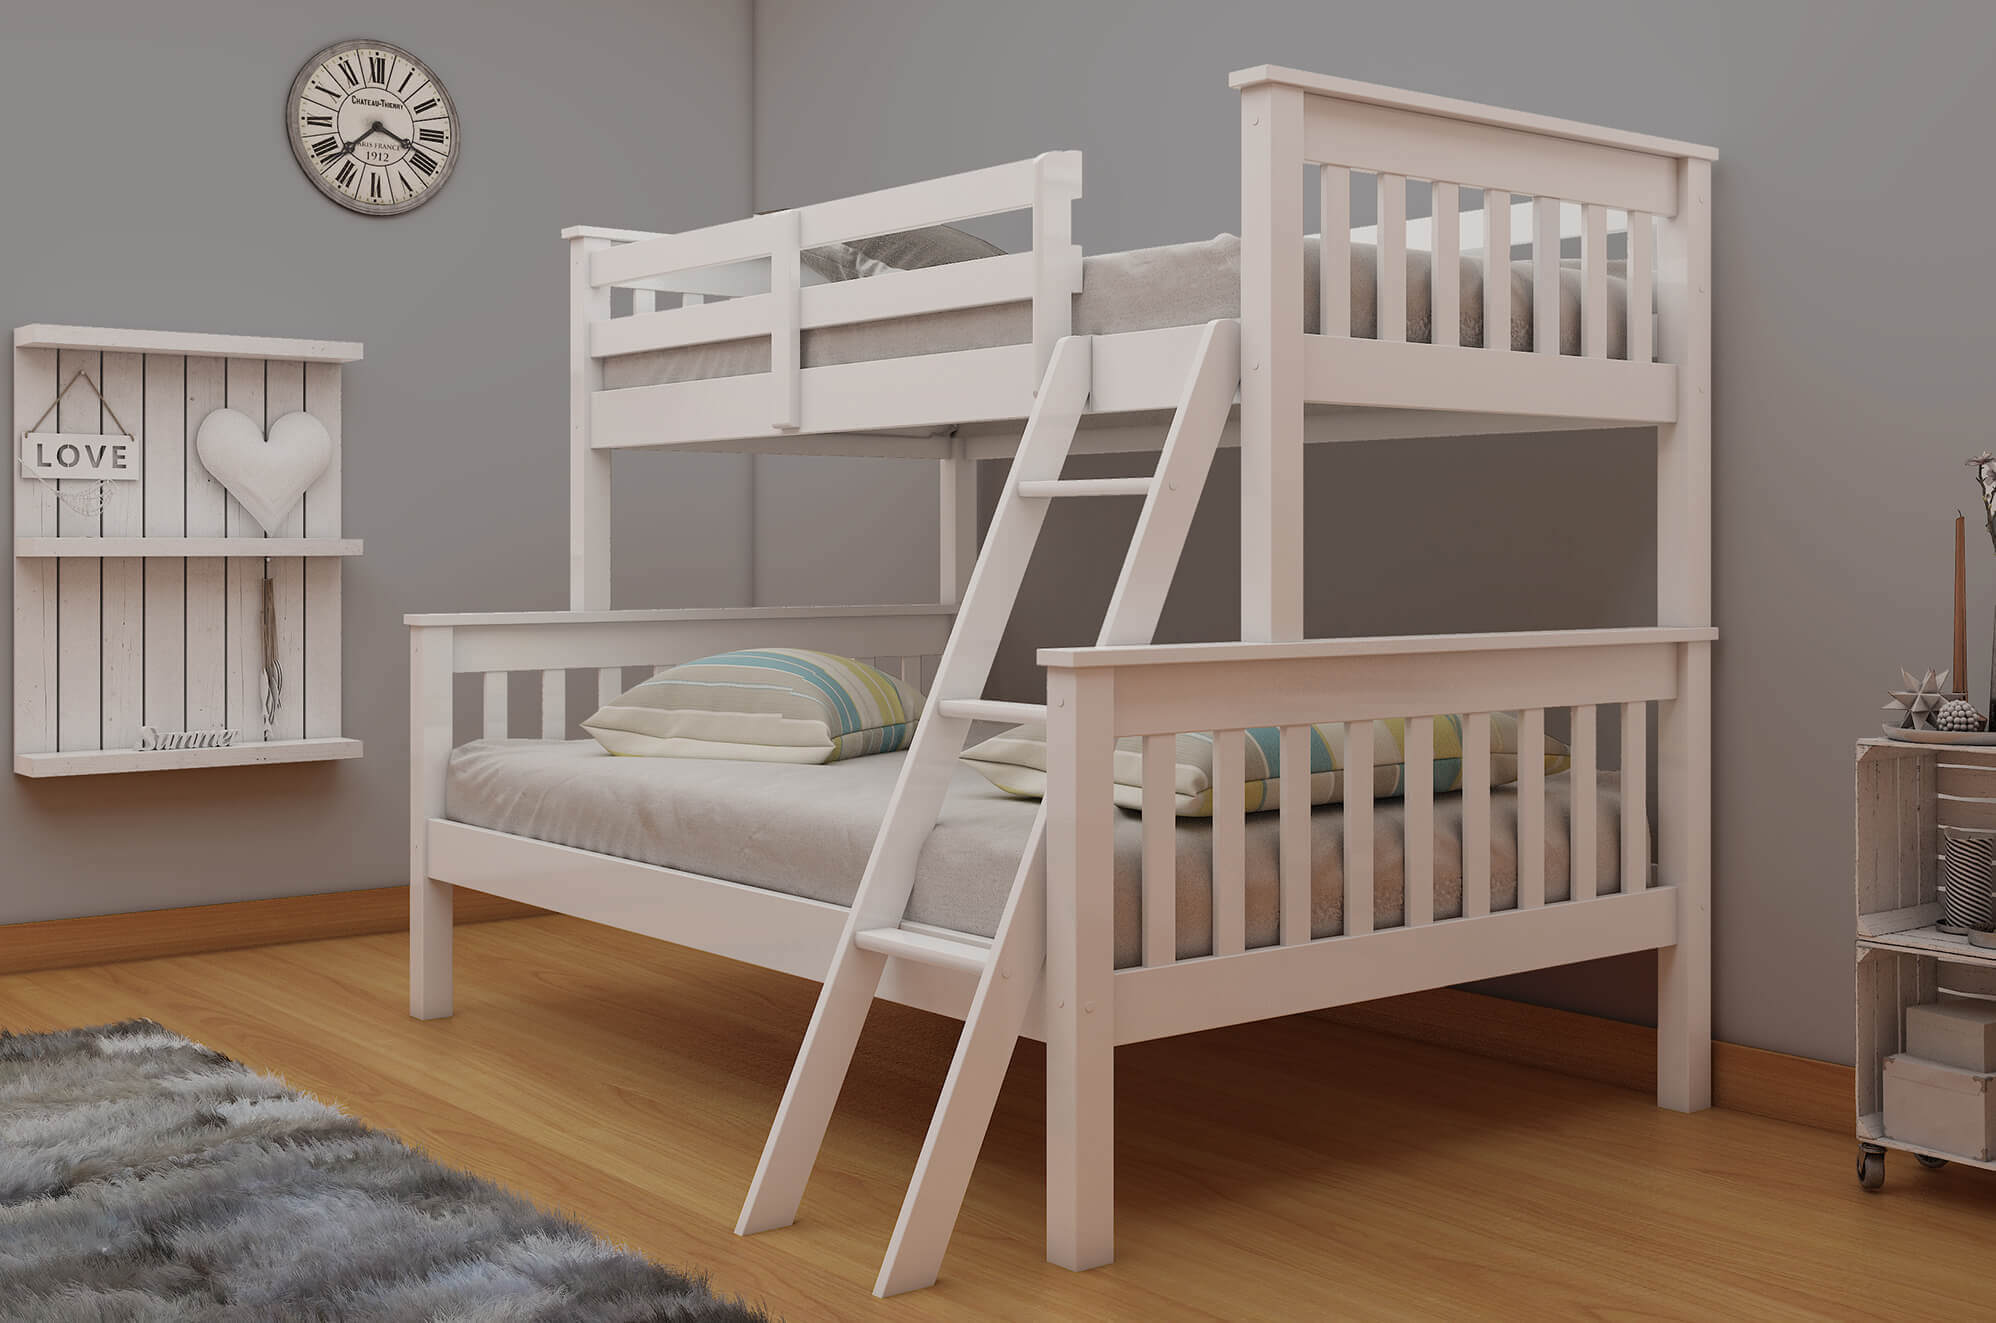 Dux Bunk Bed In White Treacy S, Bunk Bed Clock